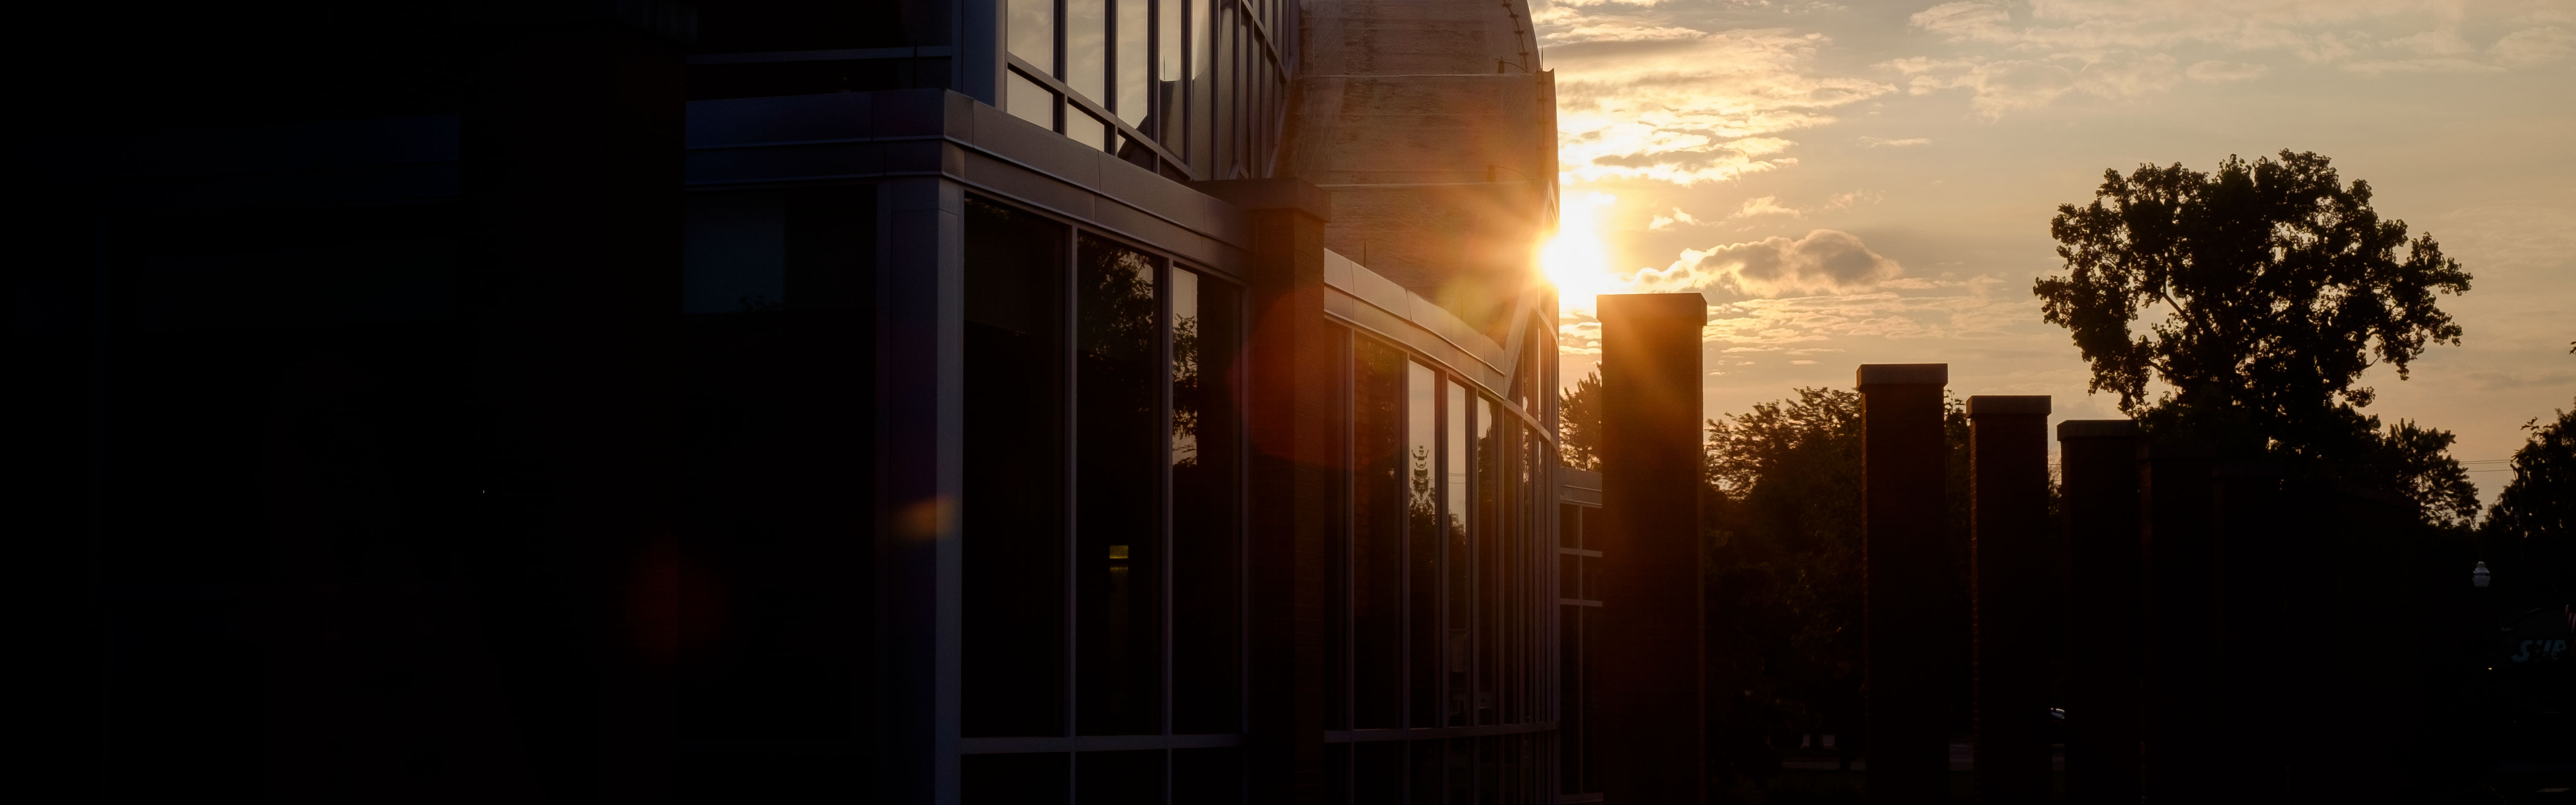 Dicke College of Business Sunset